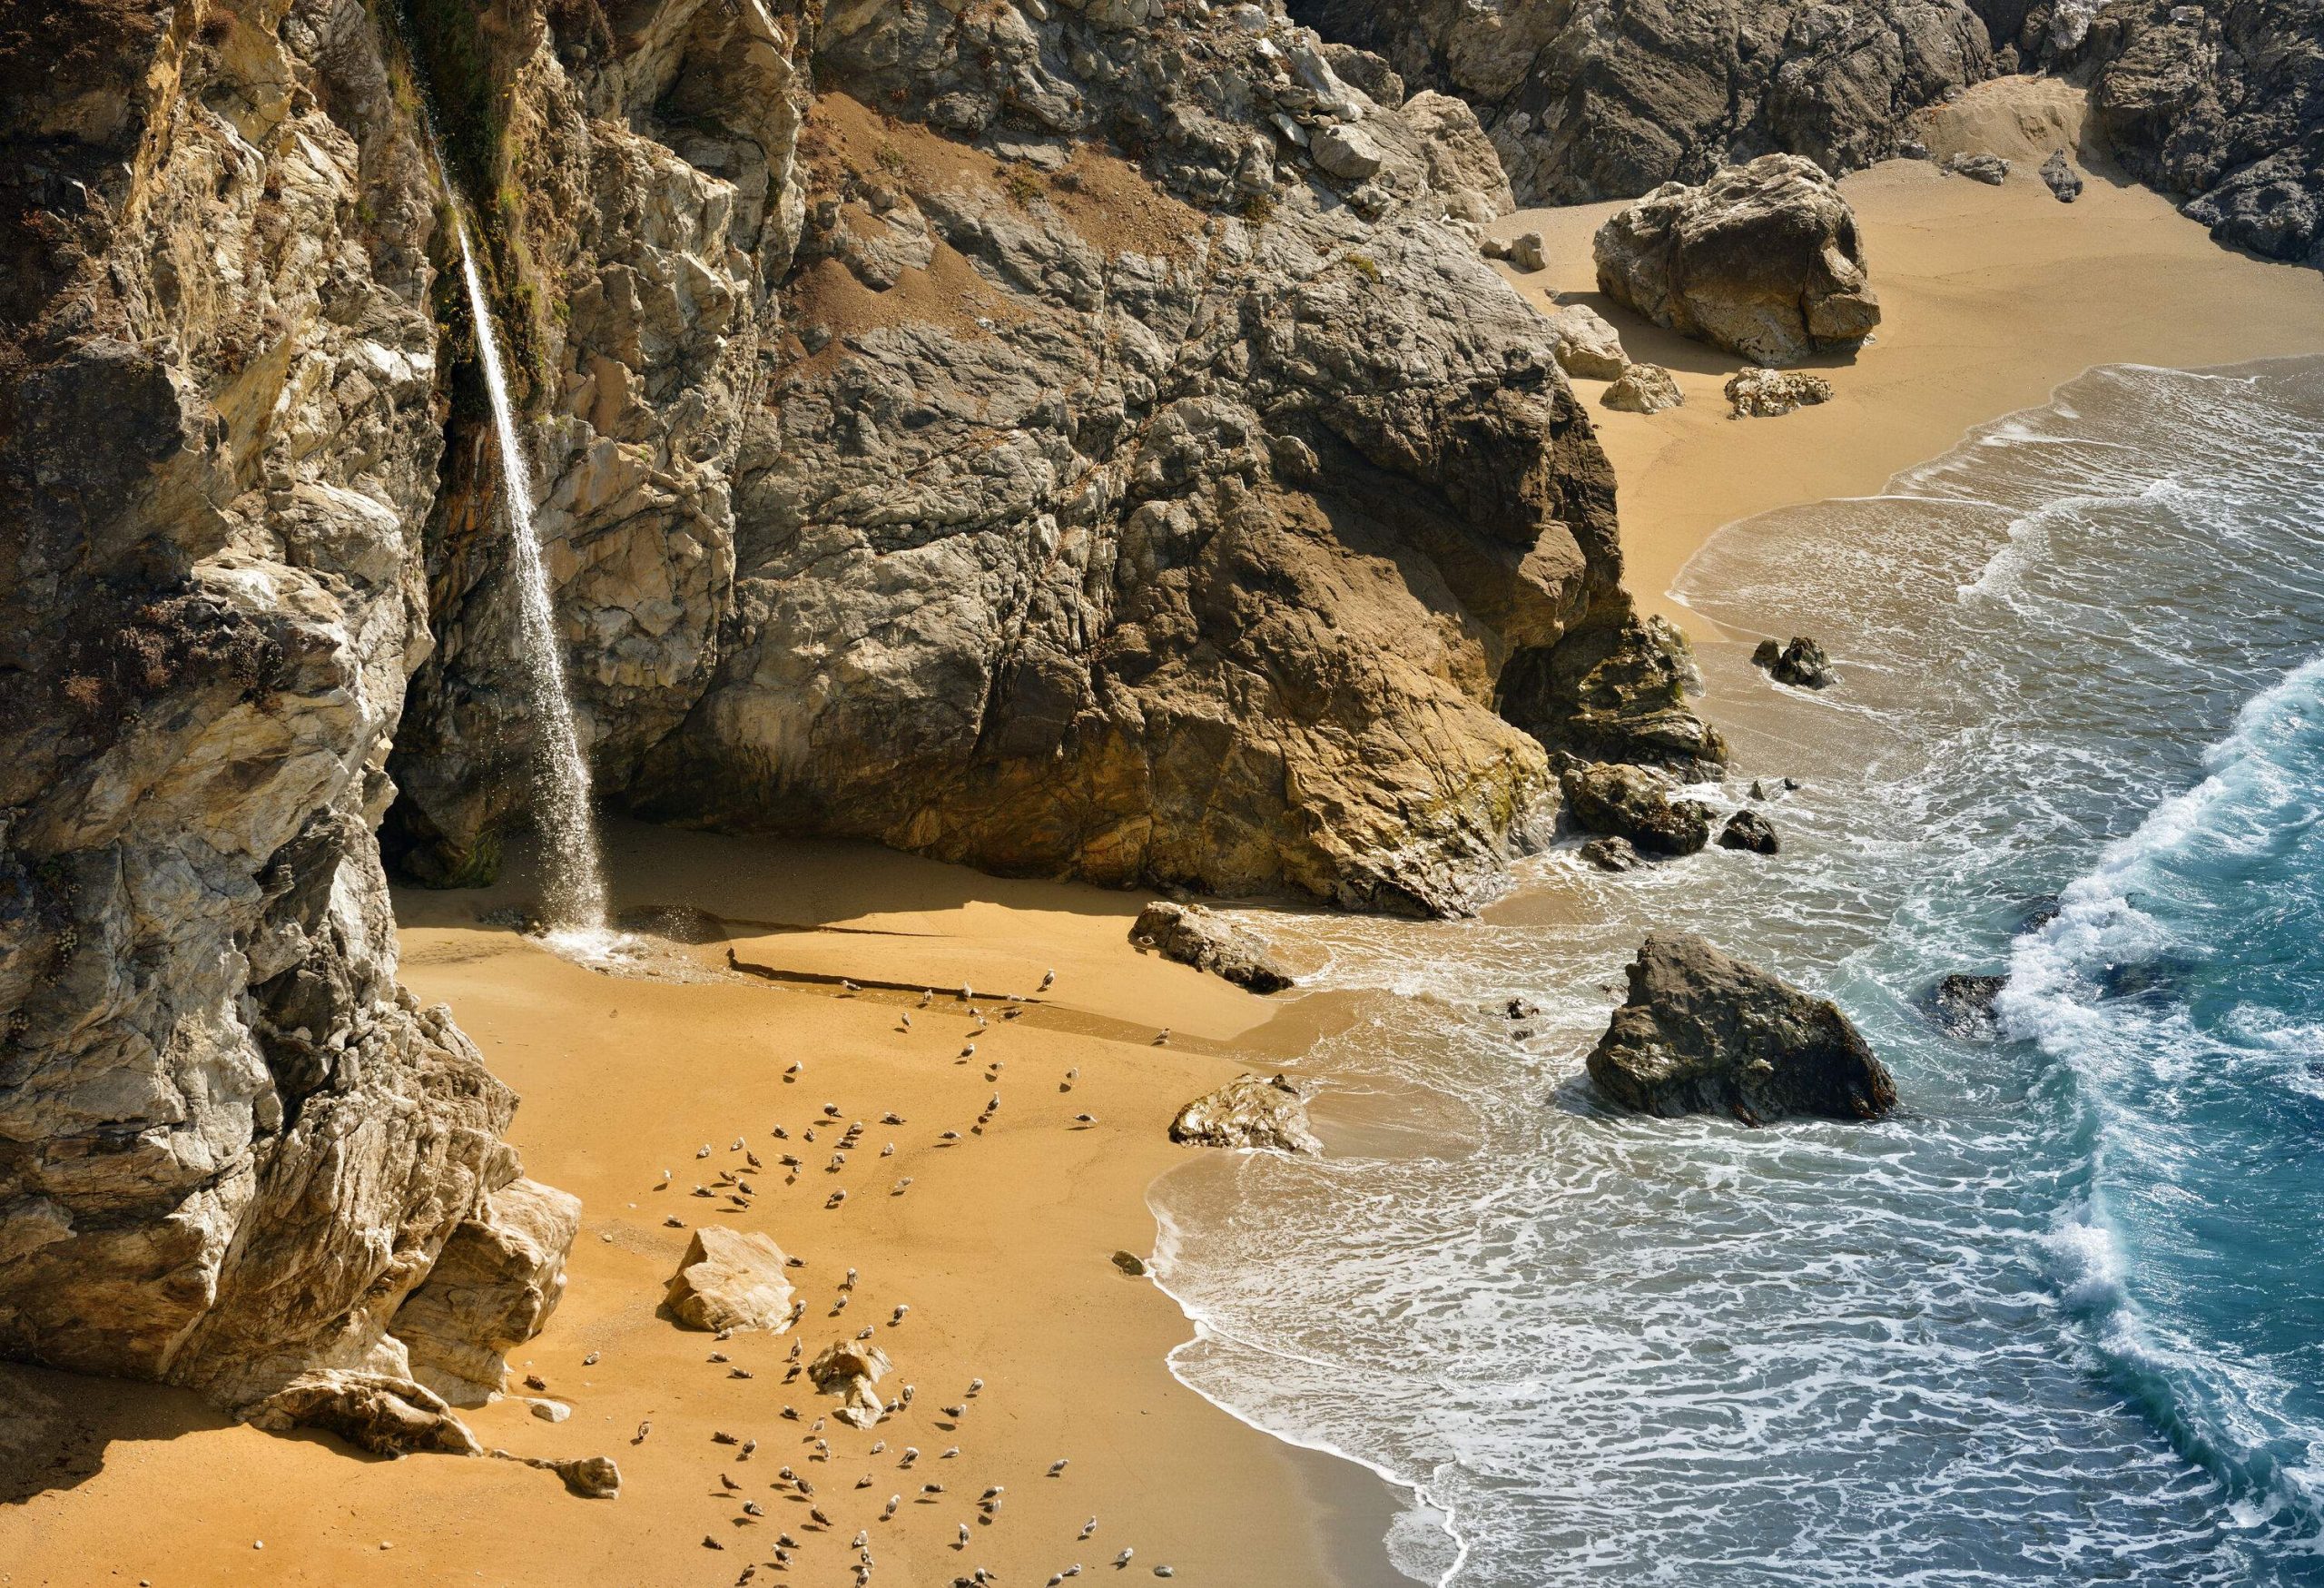 A rocky bay with a flock of seabirds on its sandy beach and a waterfall flowing to where the waves break on the shore.